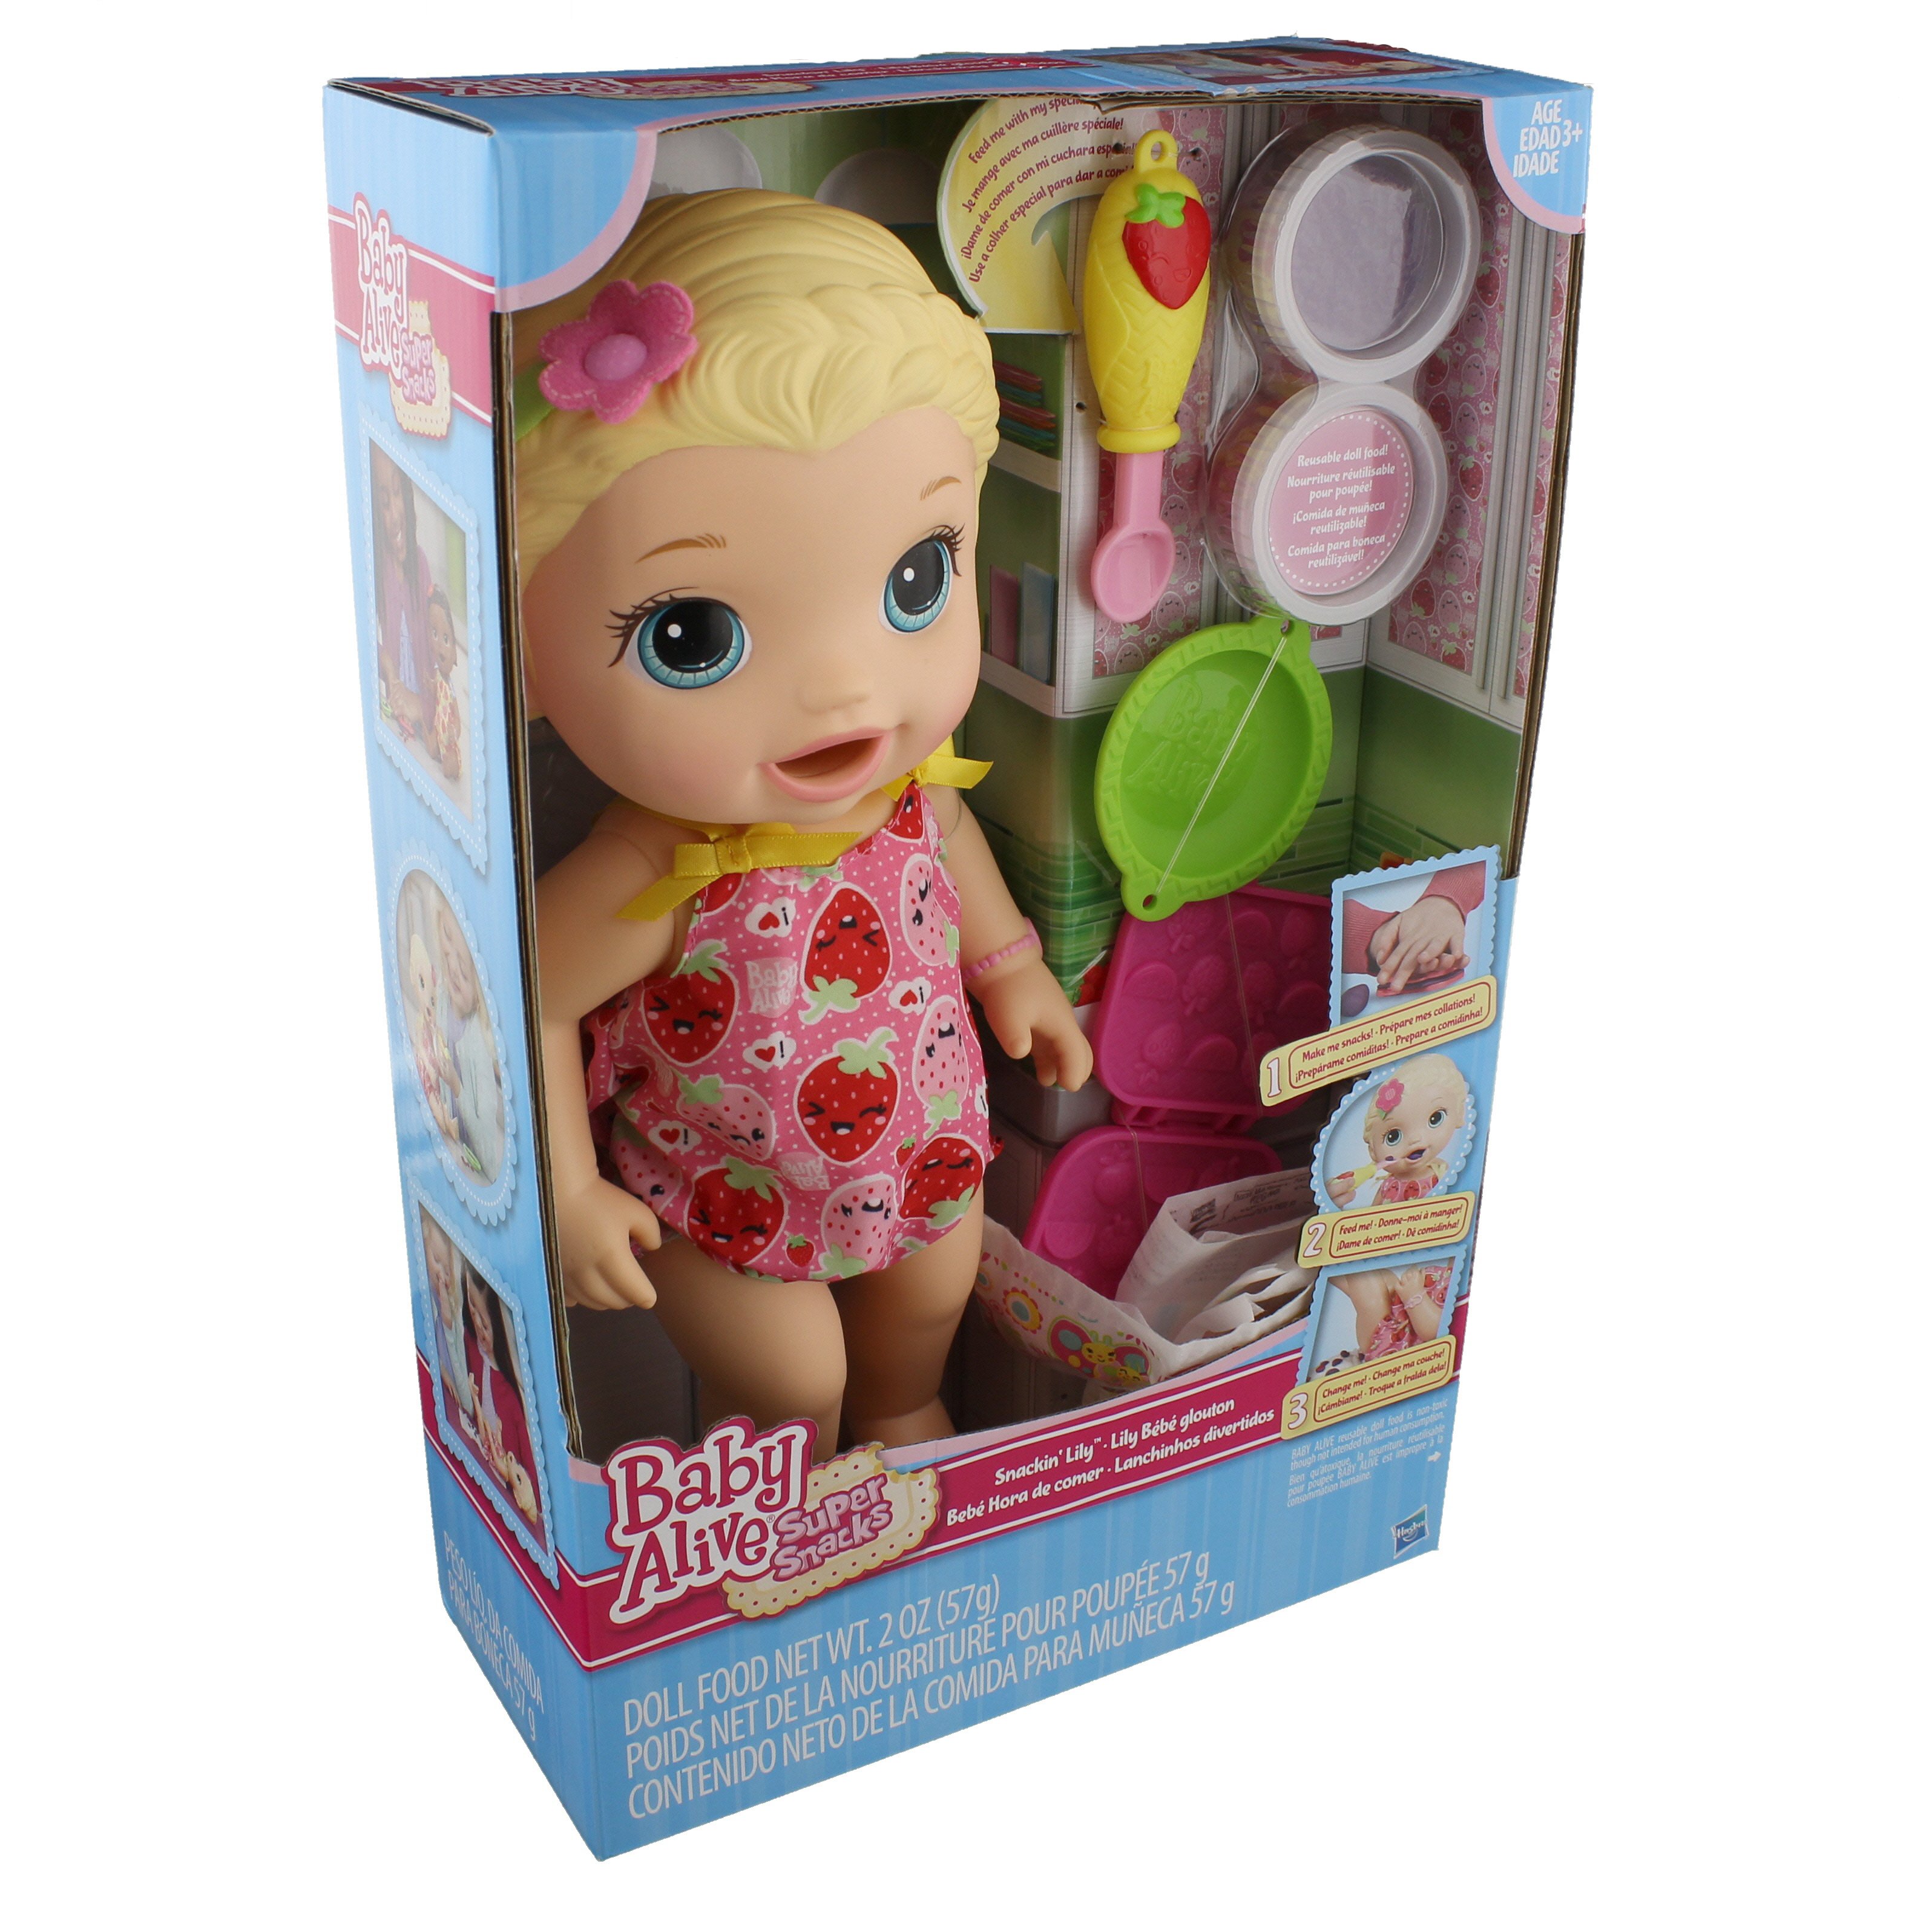 snack and lily doll baby alive